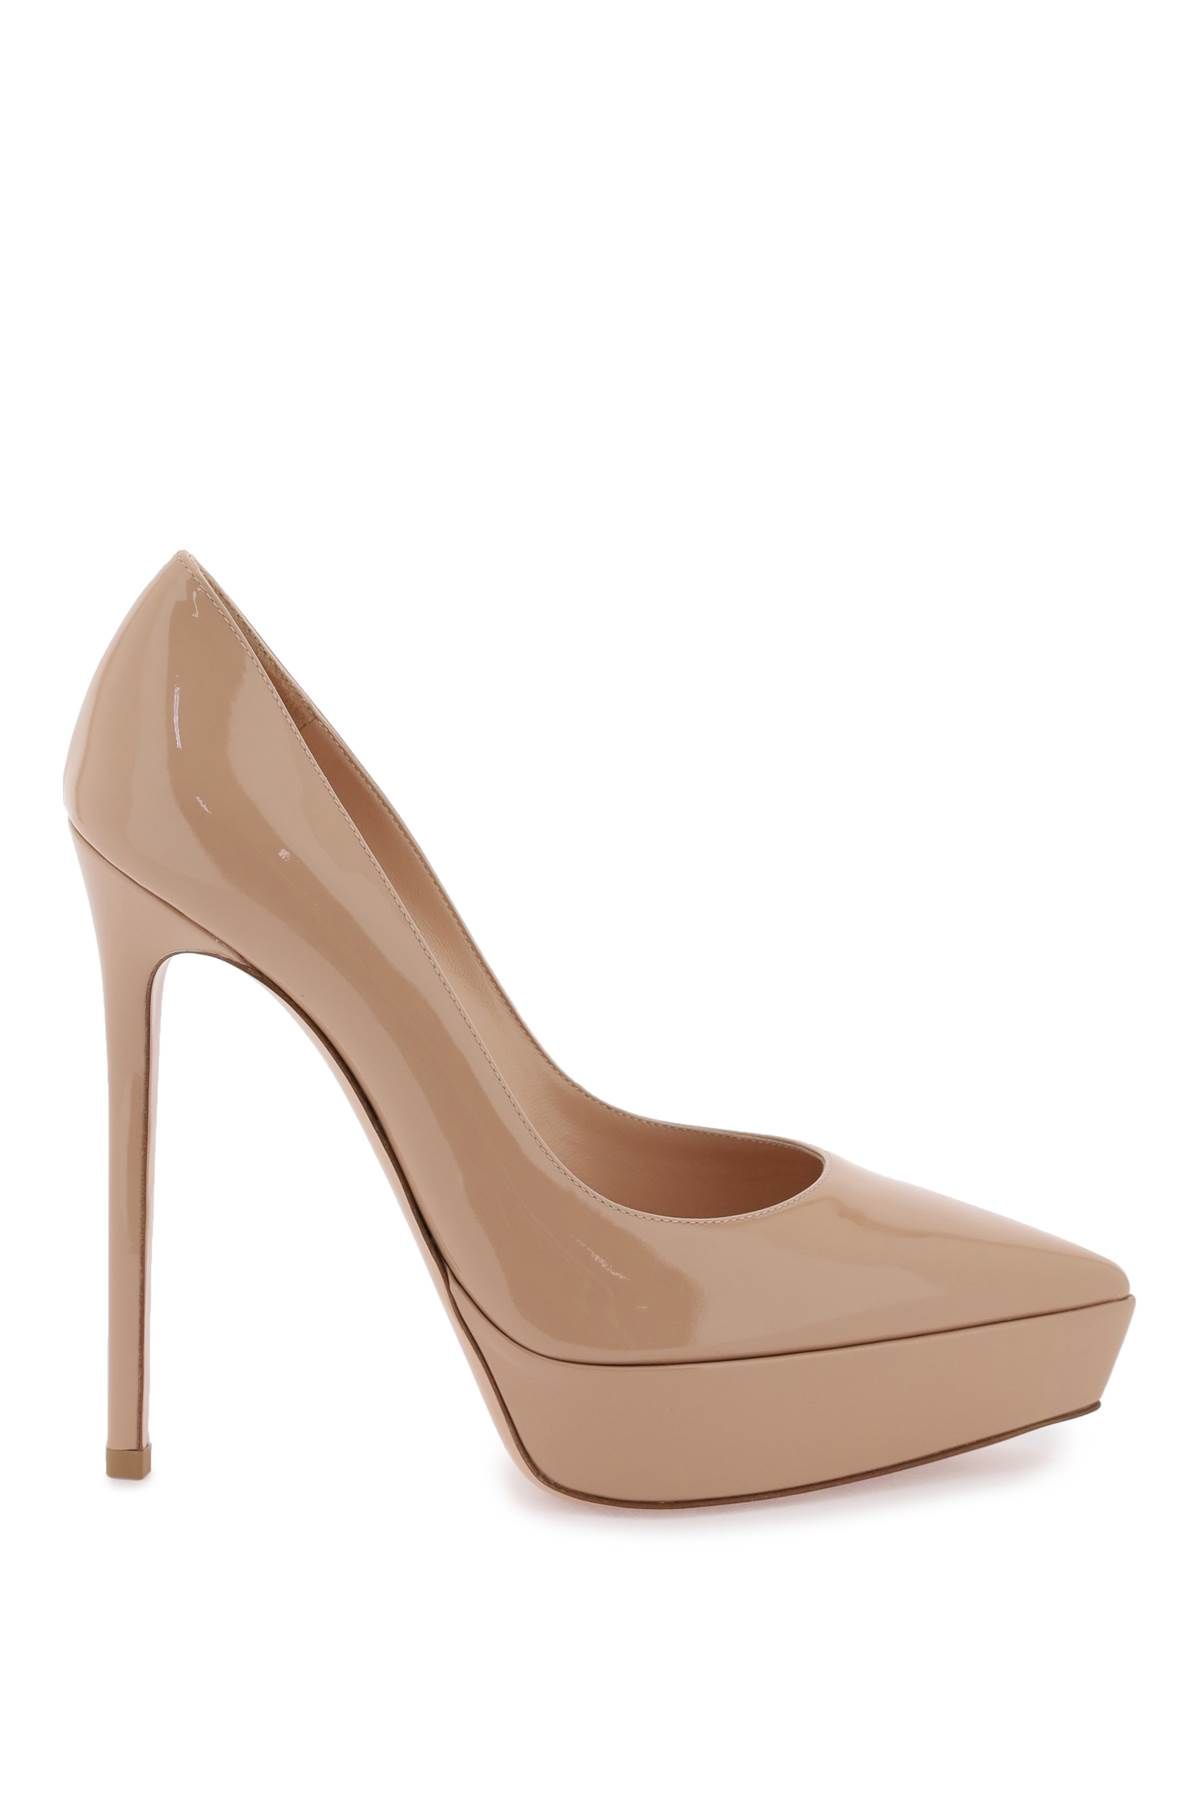 Shop Gianvito Rossi Platform Patent Leather Pumps In Pink